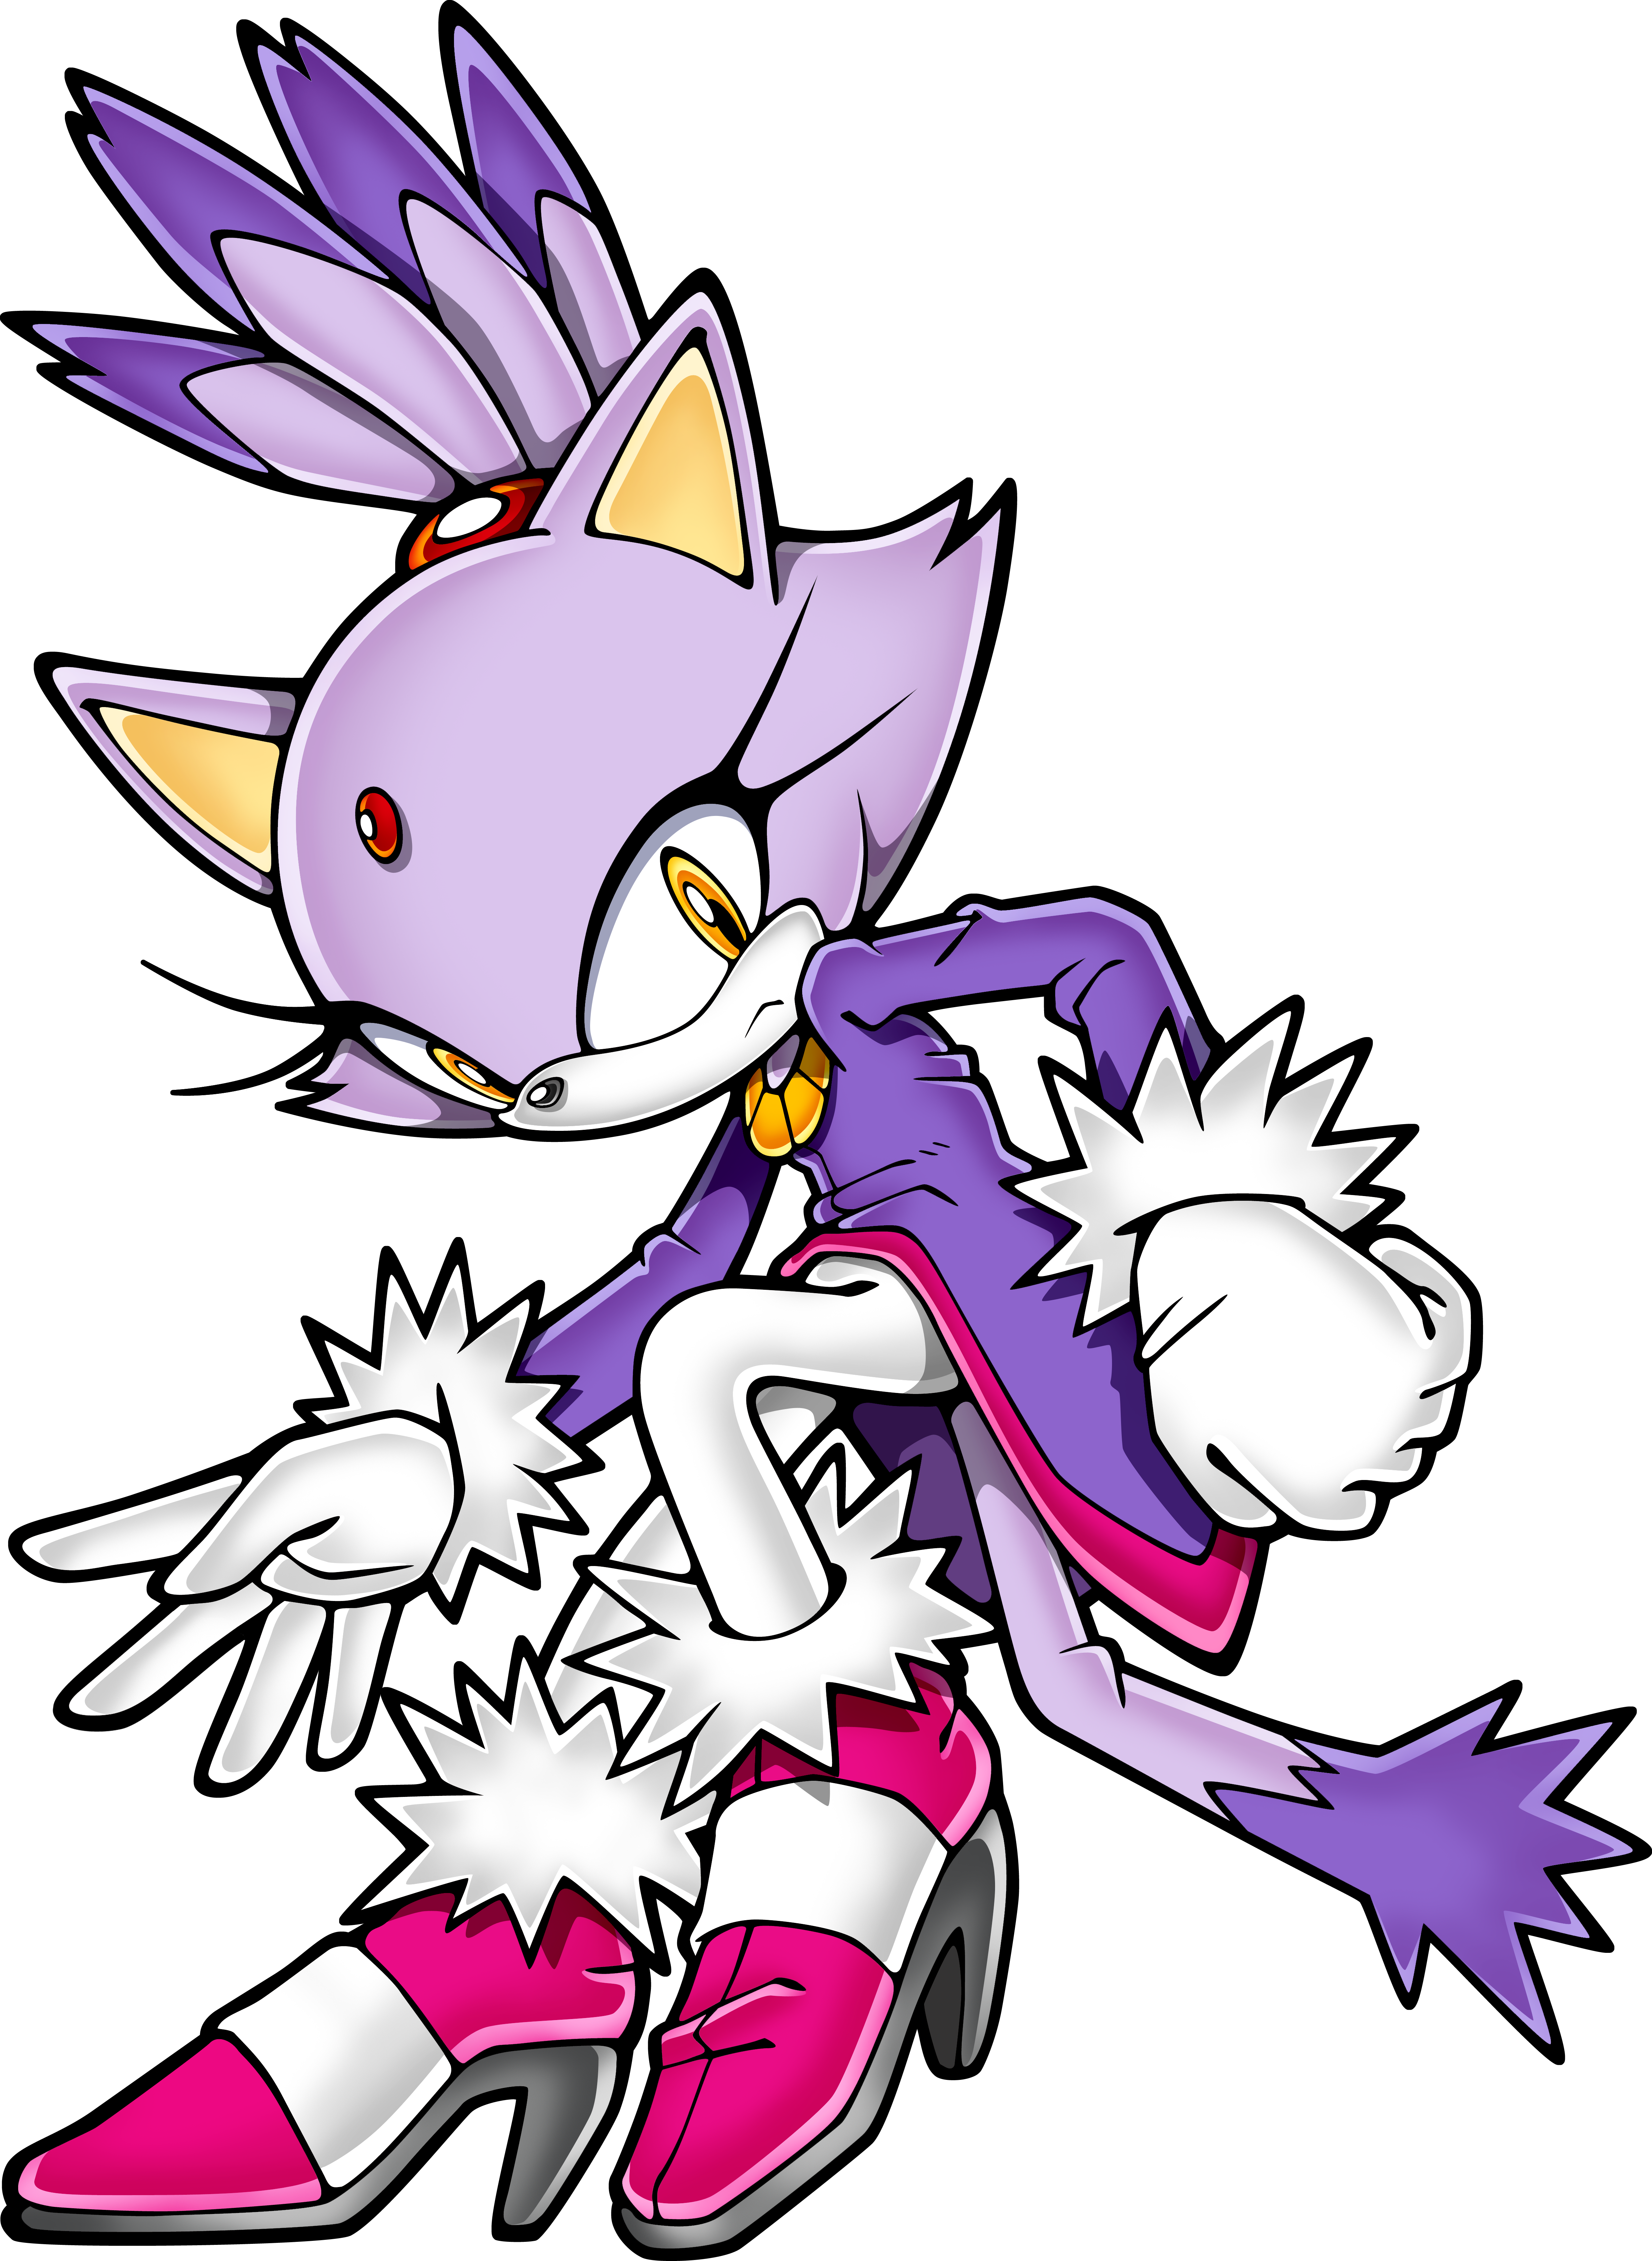 Sonic the Hedgehog (Sonic X: Heroes Forever), Hero Fanon Wiki